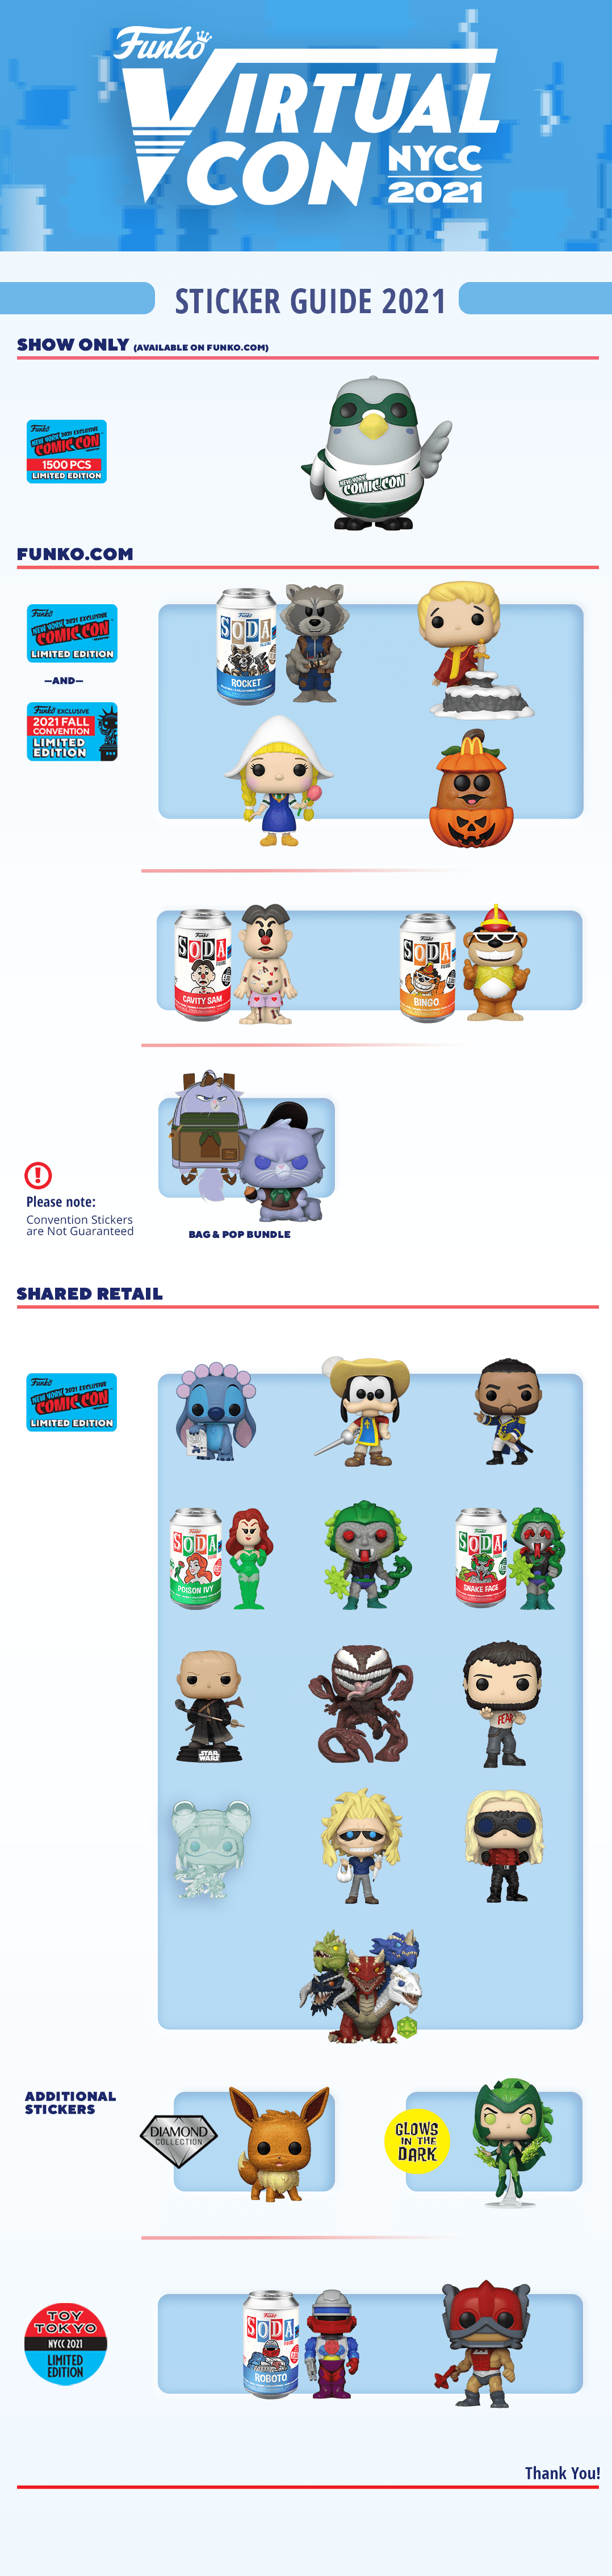 nycc-2021-funko-sticker-guide.png